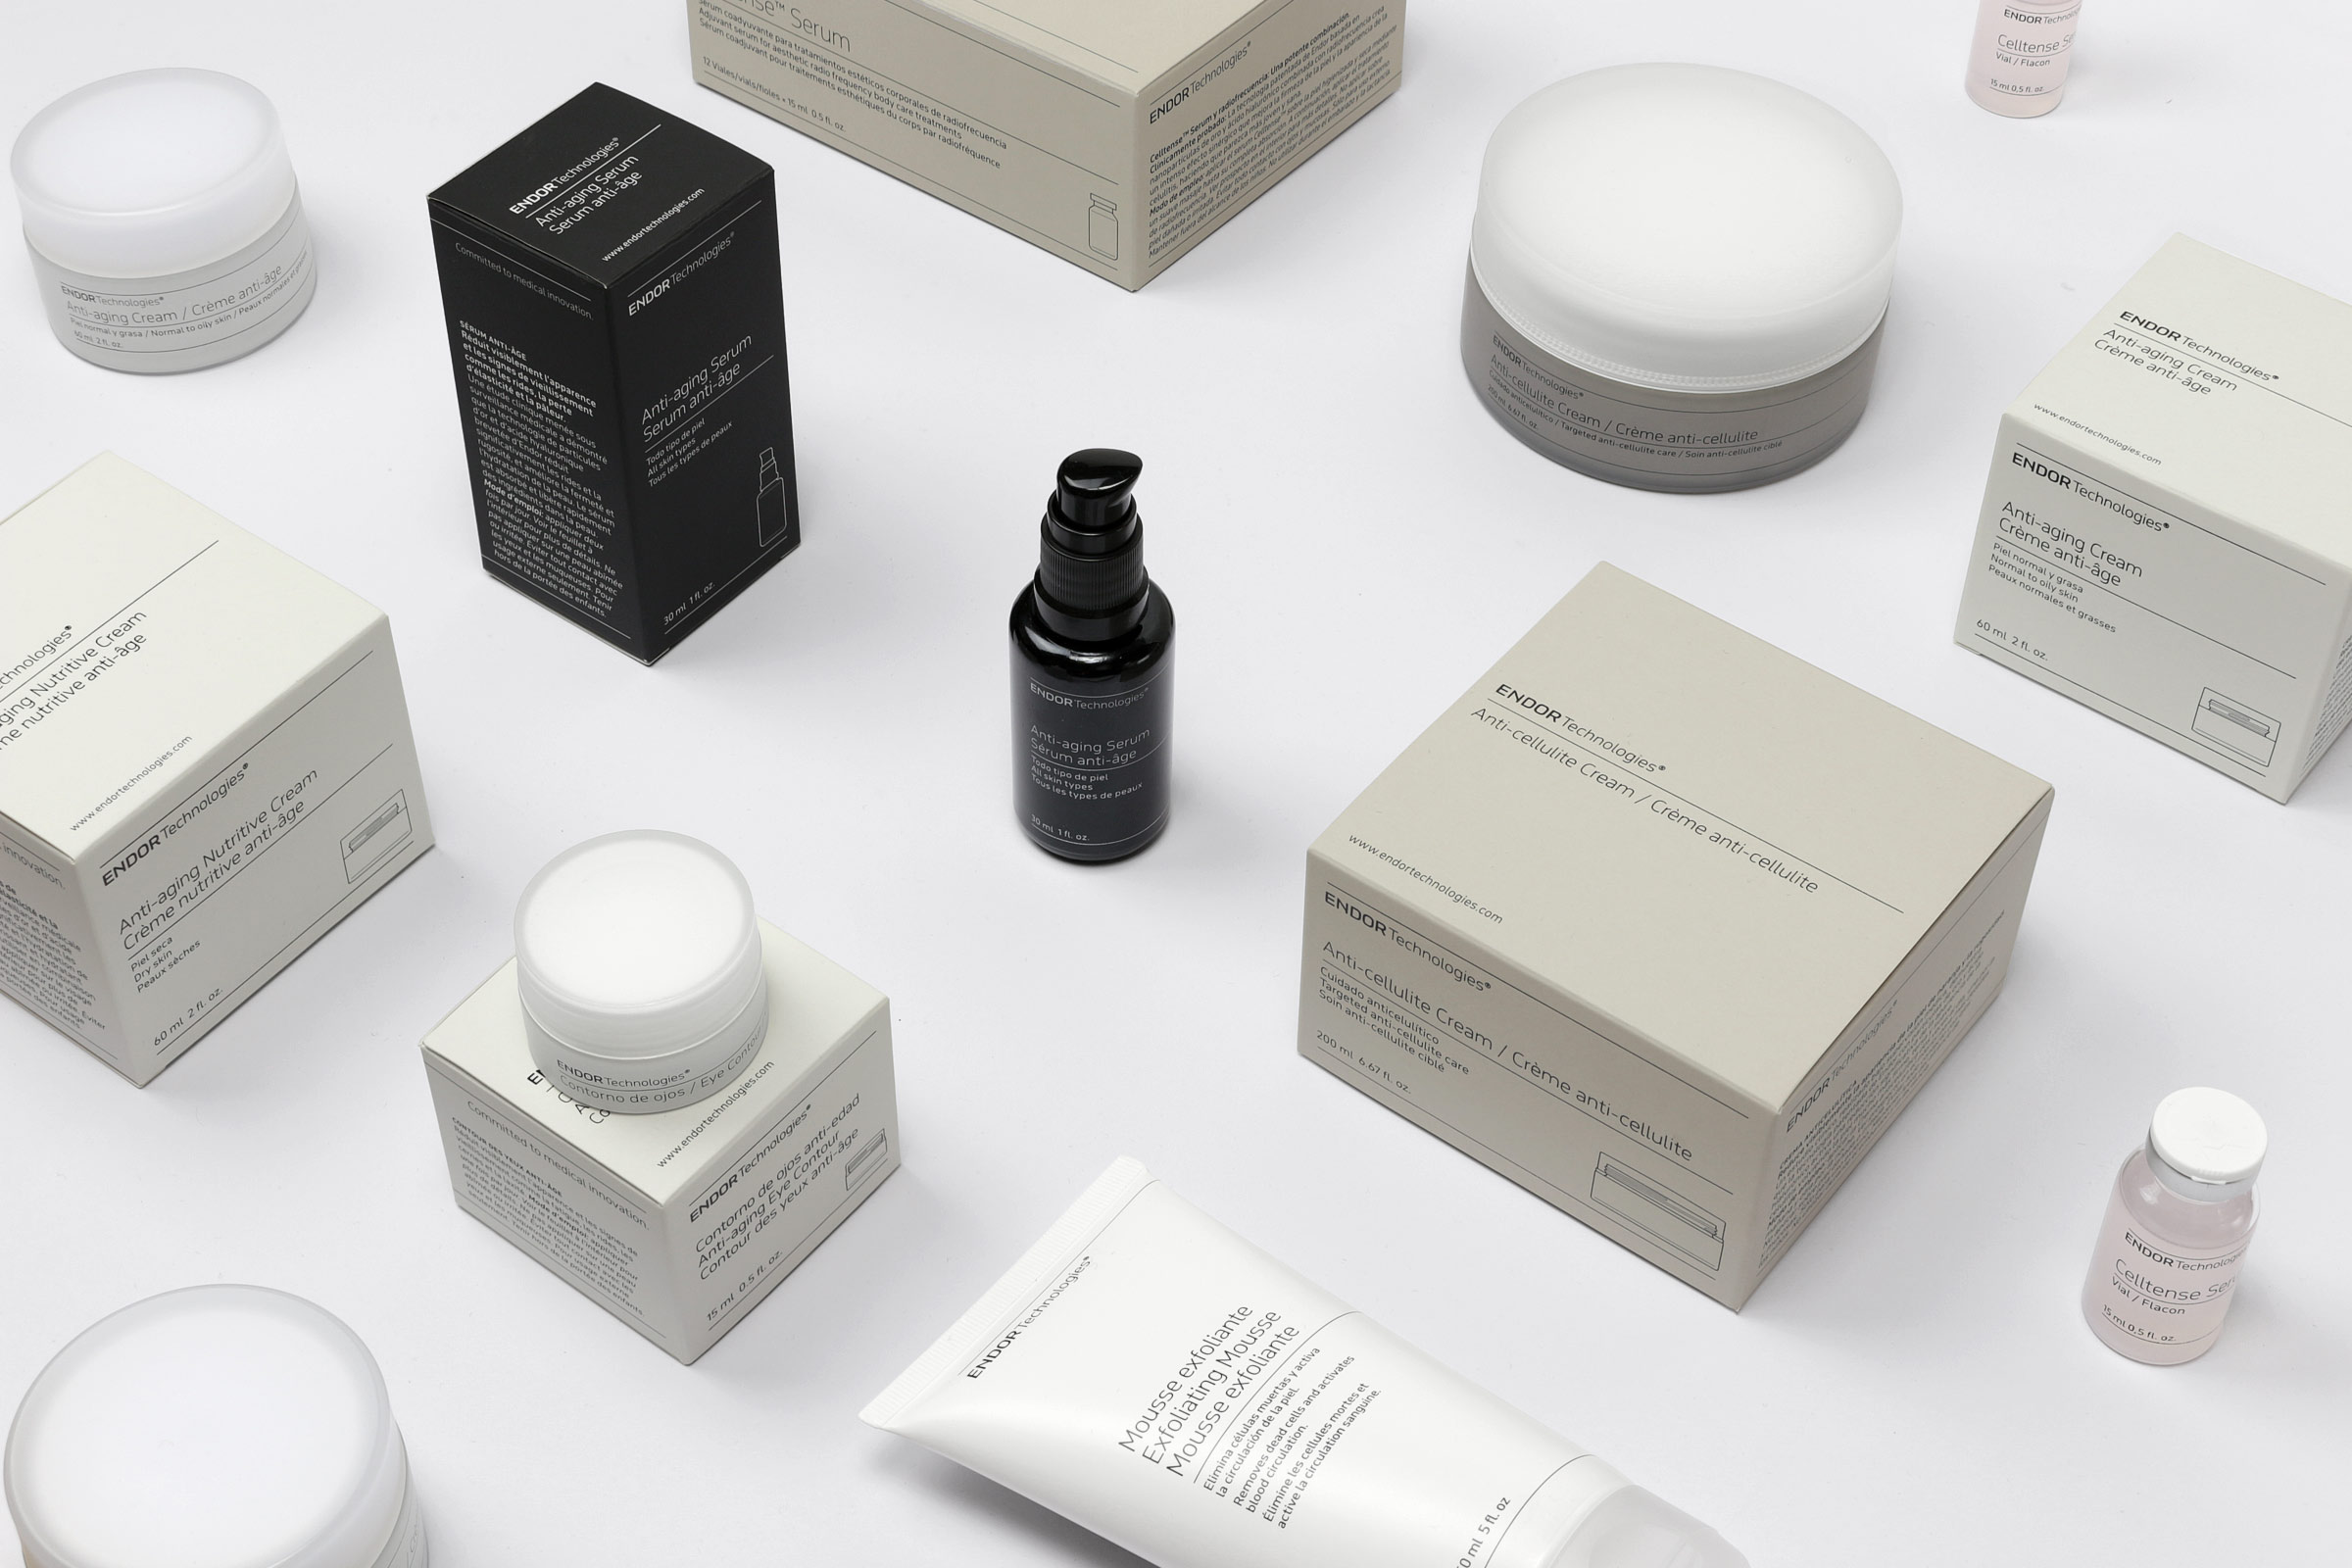 Branding and Packaging Design for Skin Care Products Developed from Medical Research